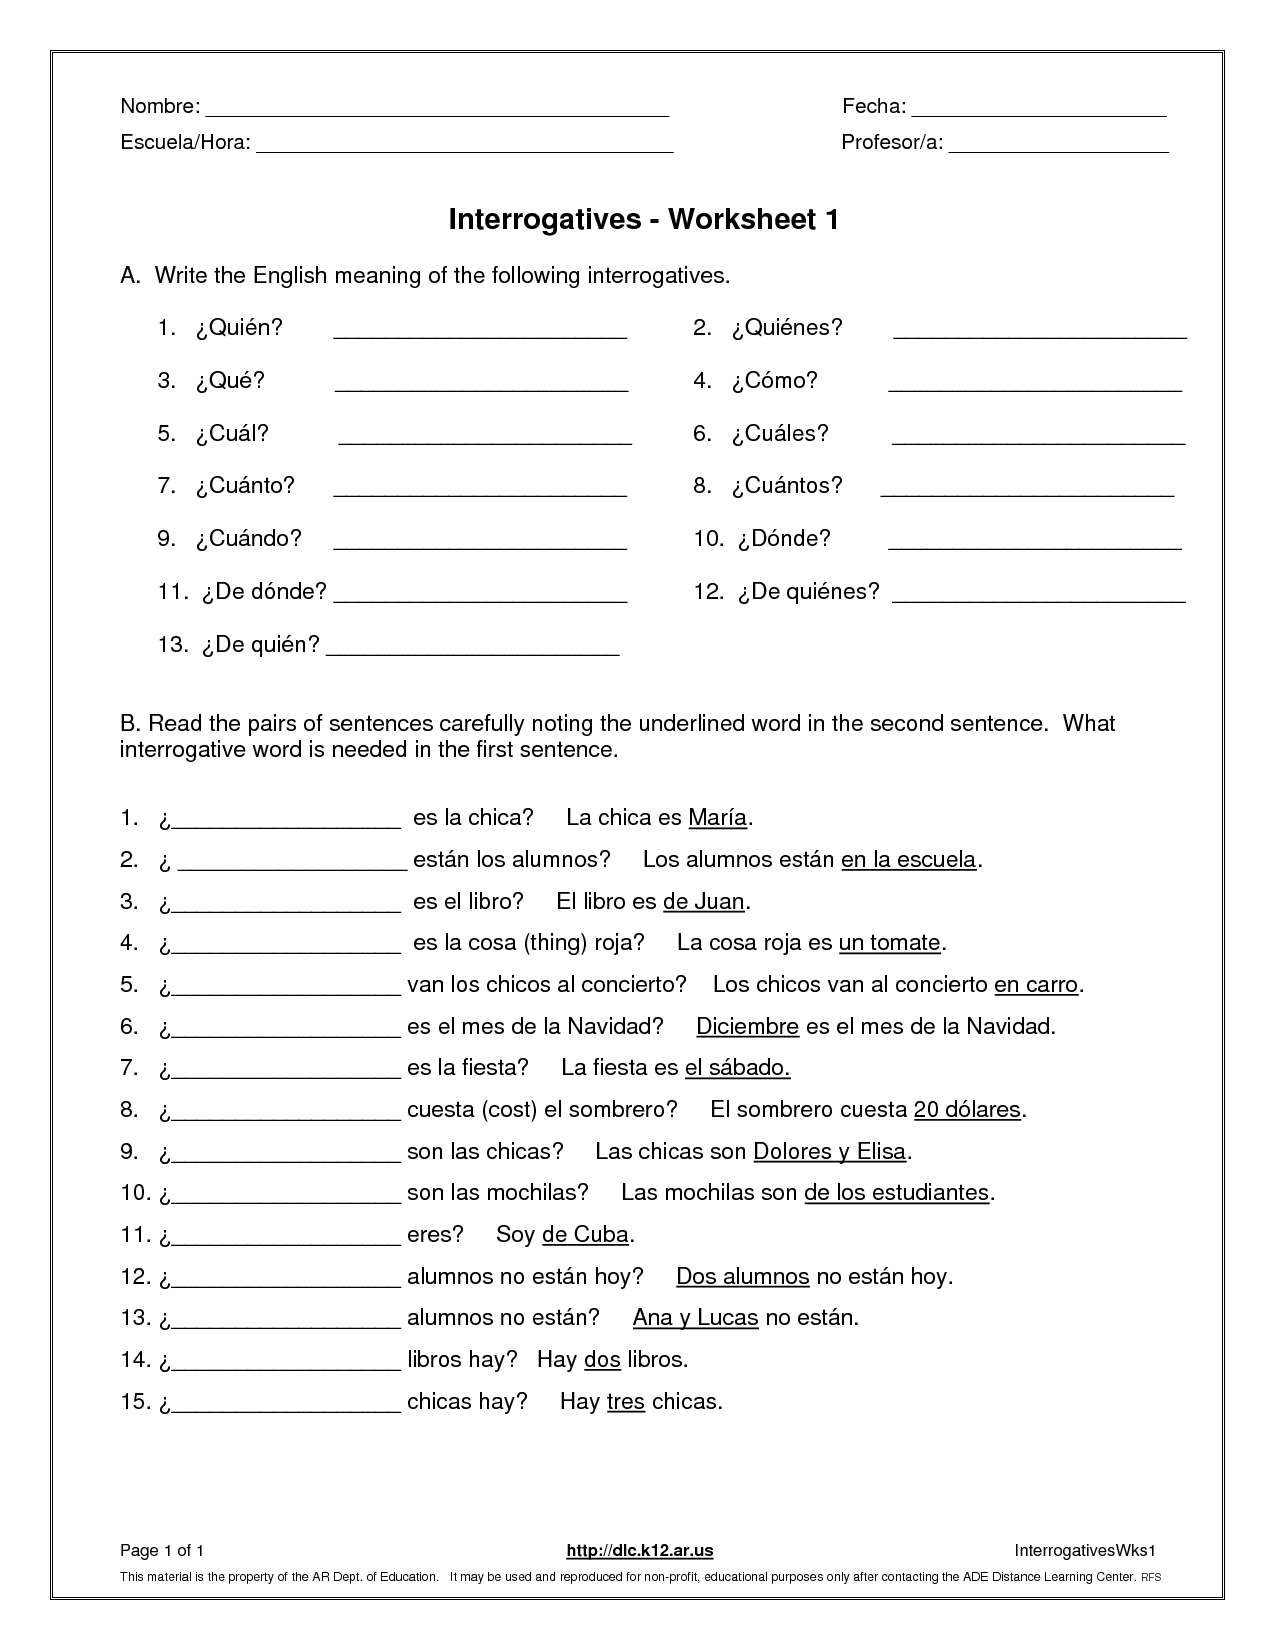 10-best-images-of-spanish-words-worksheet-spanish-words-and-phrases-worksheet-french-family